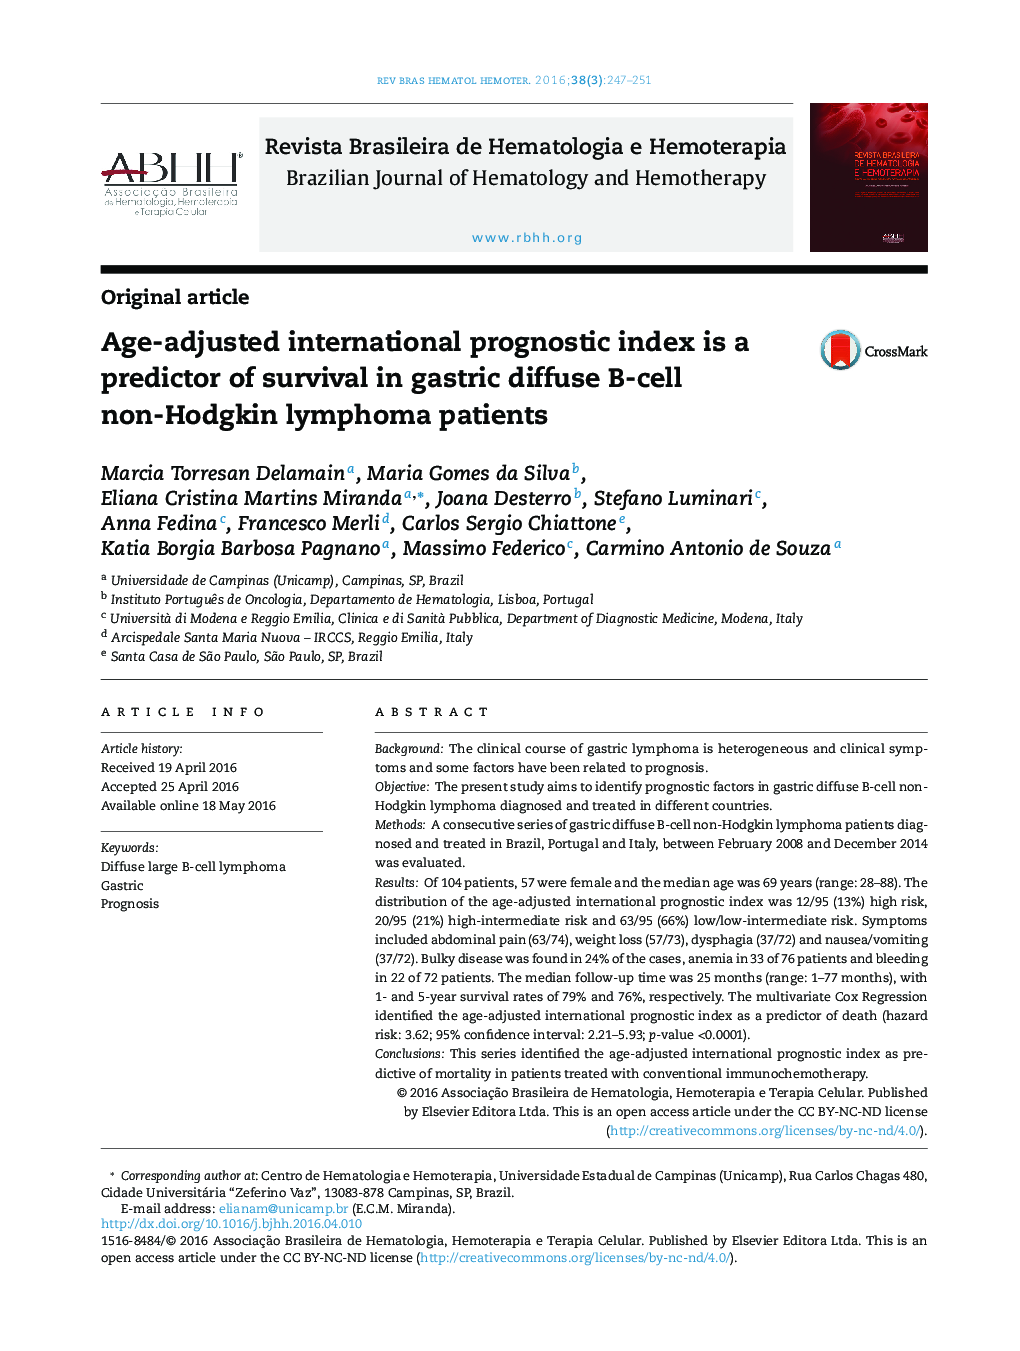 Age-adjusted international prognostic index is a predictor of survival in gastric diffuse B-cell non-Hodgkin lymphoma patients